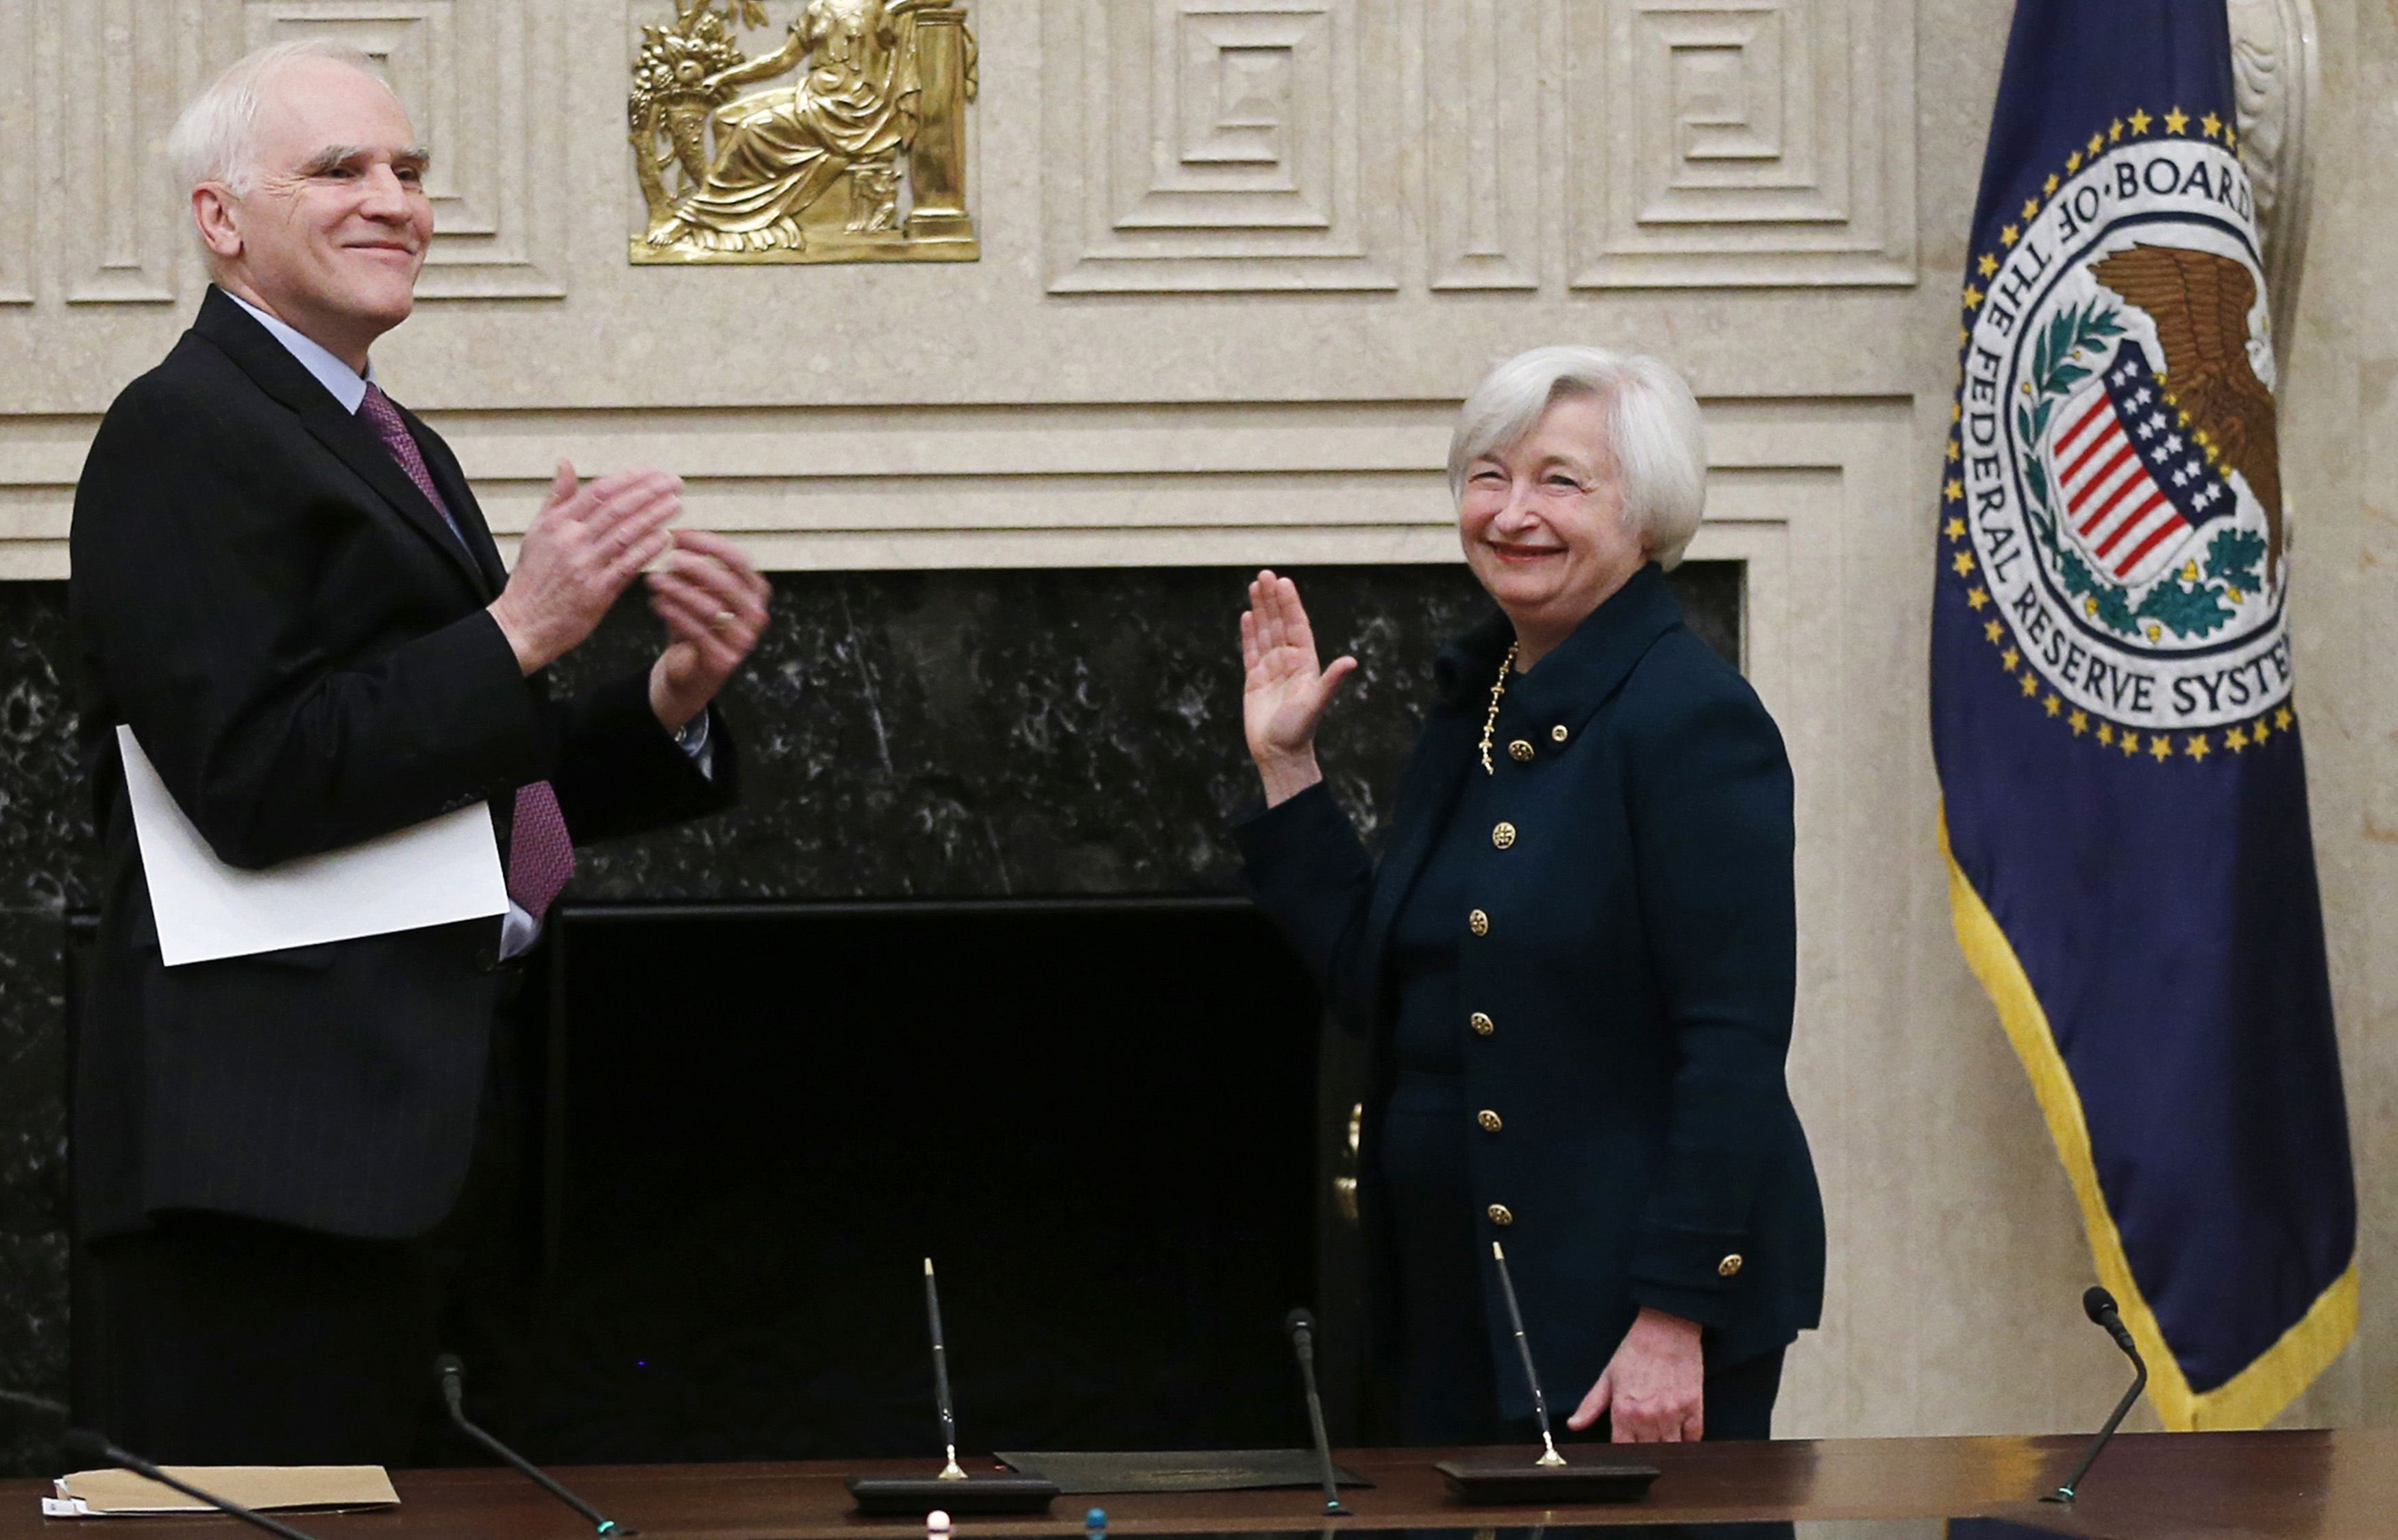 Federal Reserve Board Governor Tarullo applauds new Federal Reserve Board Chairwoman Yellen after administering the oath of office at the Federal Reserve Board in Washington